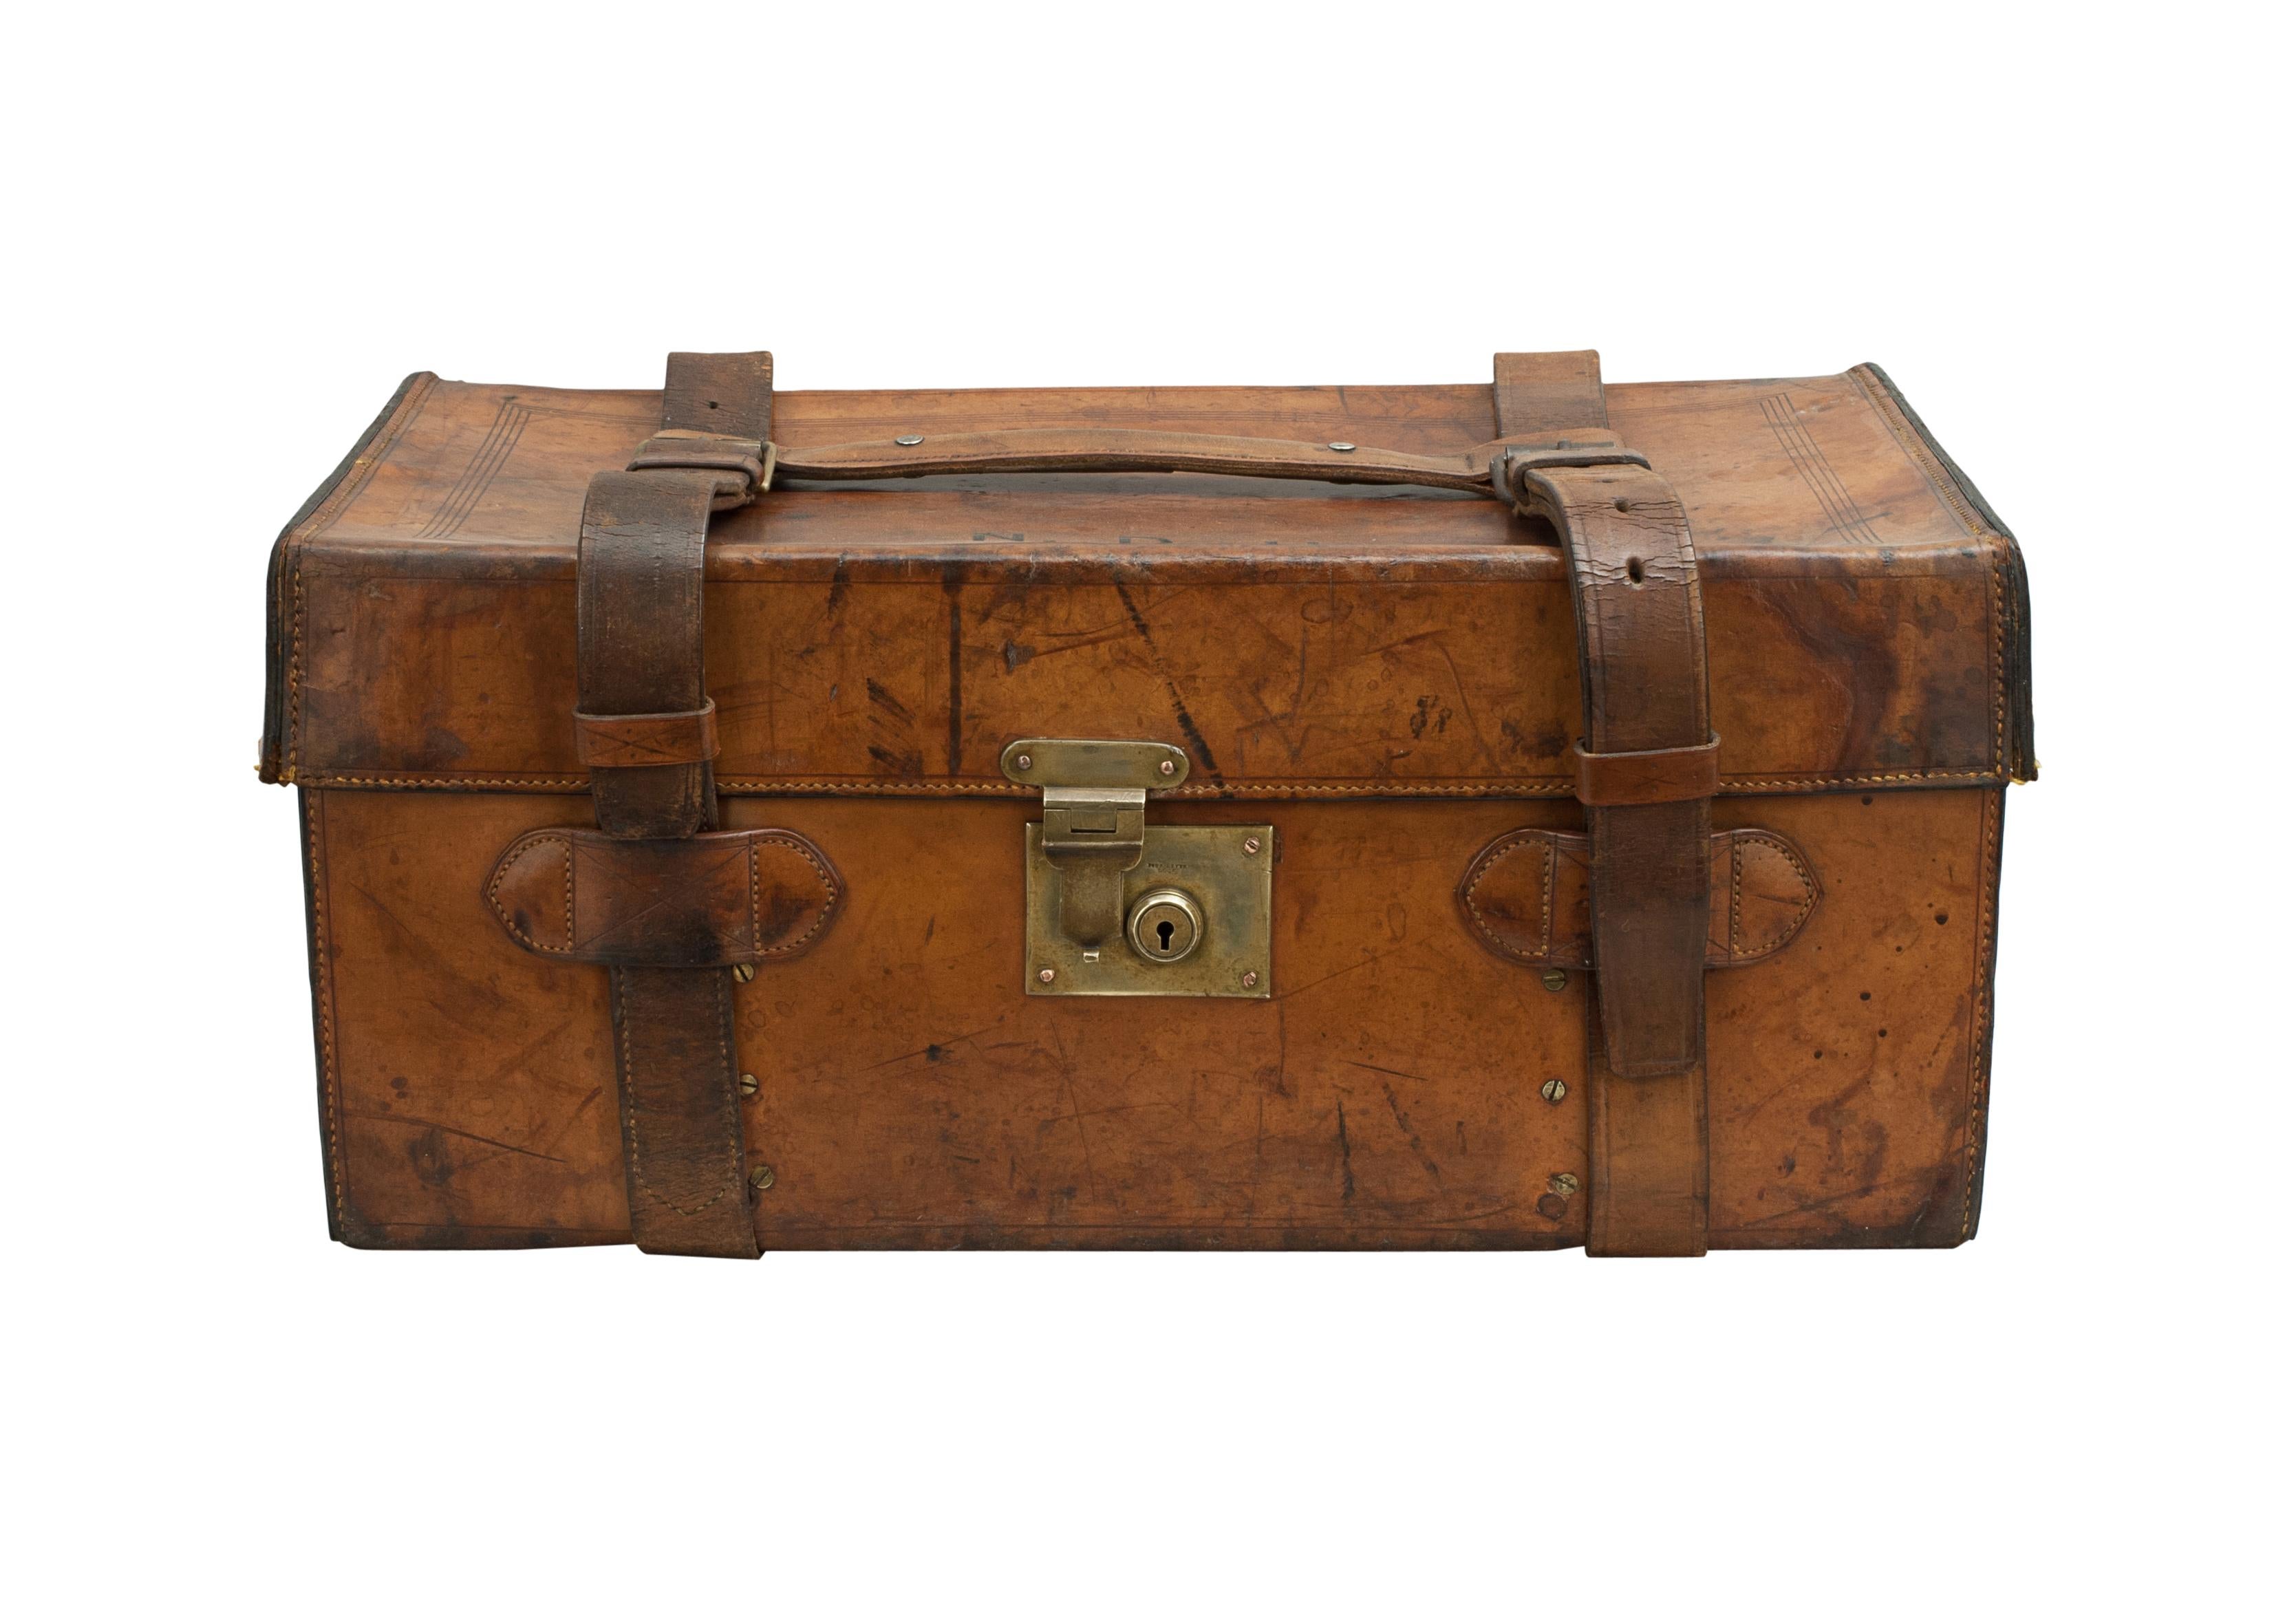 Large leather Farlow tackle case.
A good, large size leather fishing trunk with a single oak lift out tray with five compartments below. The Anglers case with original twin leather straps that hold a central leather carry handle. The inside is